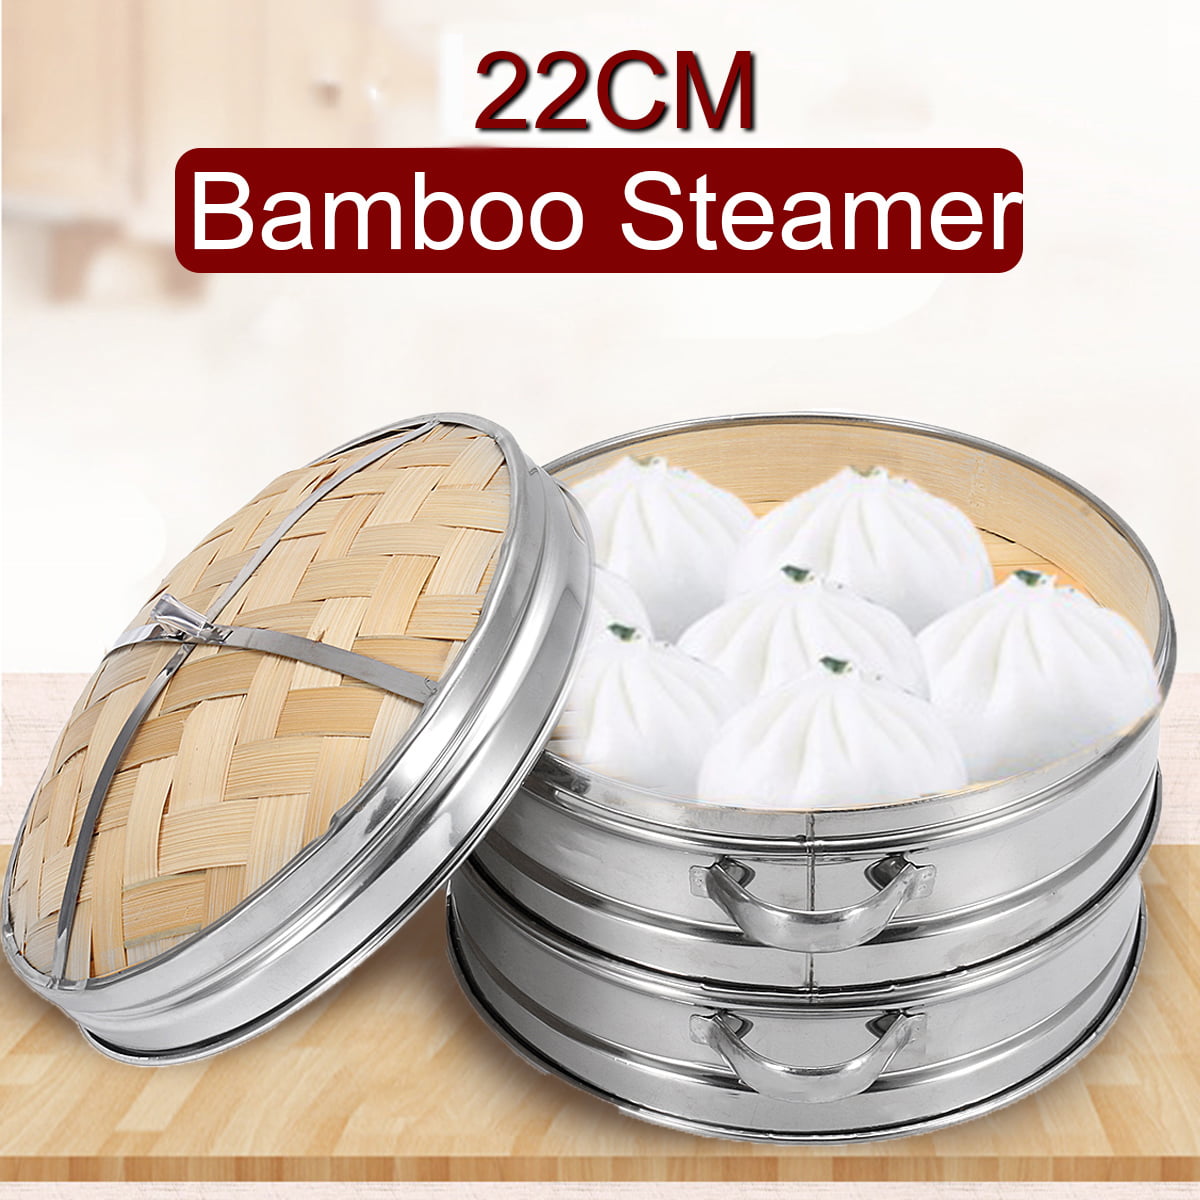 2 Tiers Bamboo Steamer Kitchen Cookware Basket Cooker Set Stainless Steel 